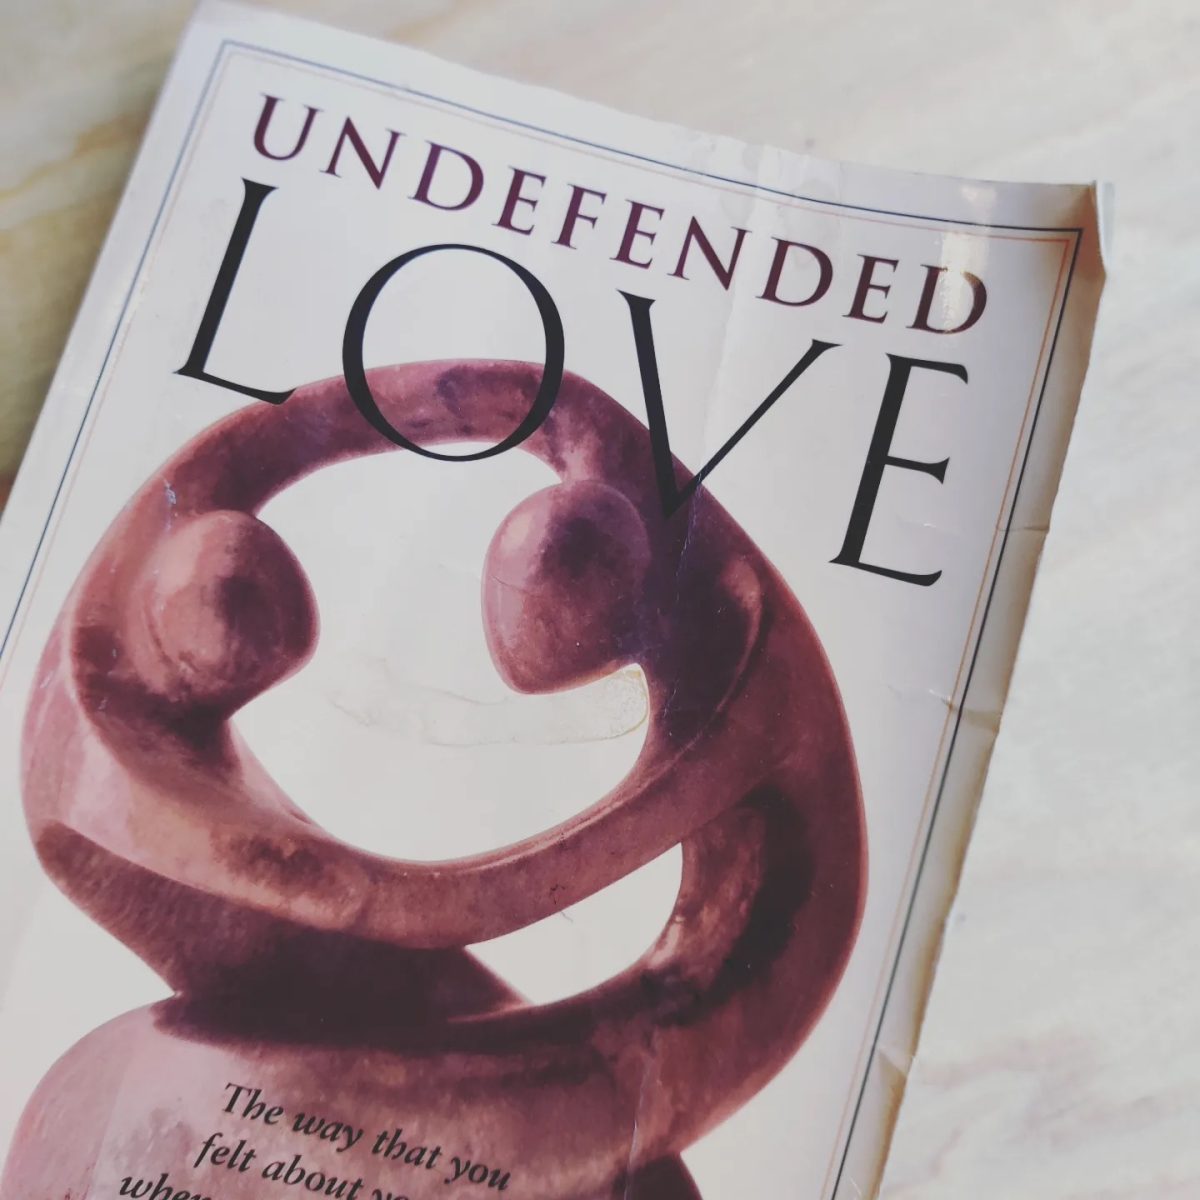 Undefended Love: a book that questions everything you were (never) taught about relationships